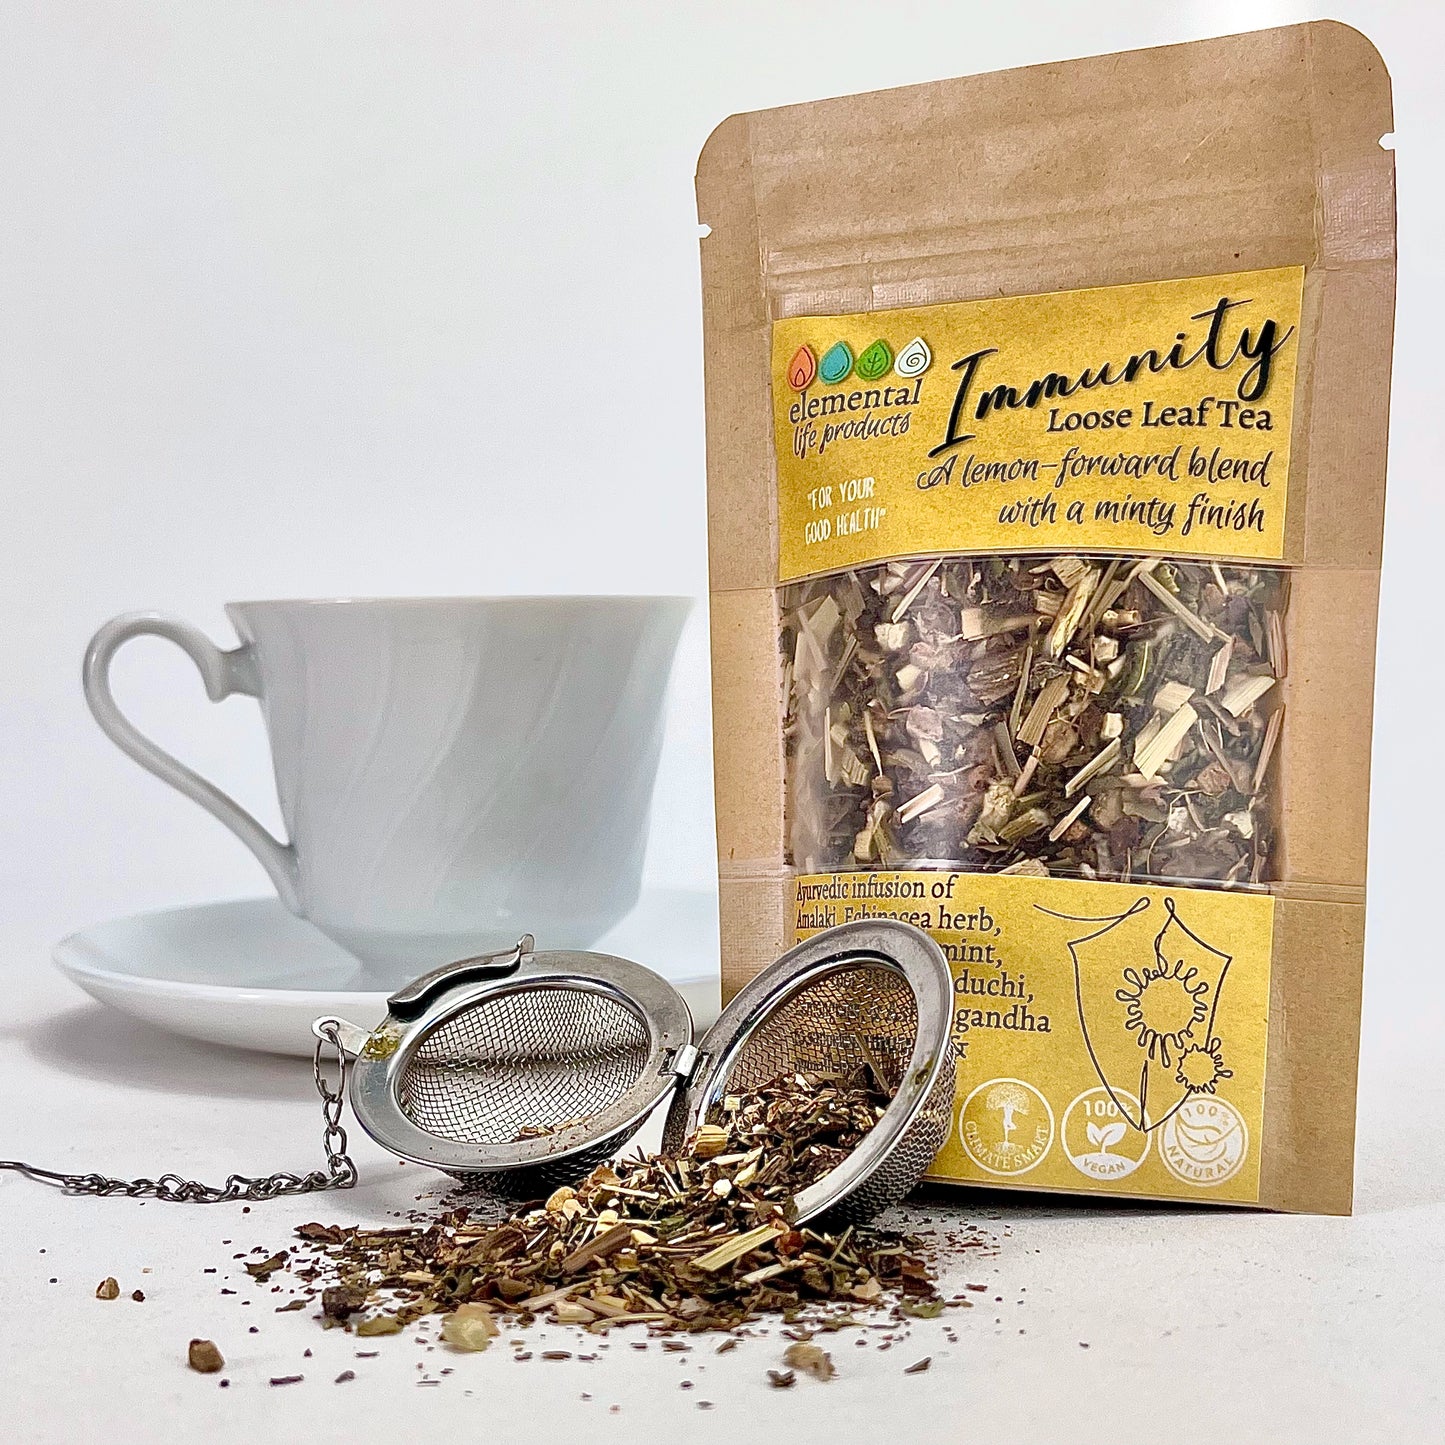 Elemental Life Product's Immunity loose leaf tea blend with Amalaki, Echinacea herb, and Burdock with a tea ball and tea cup